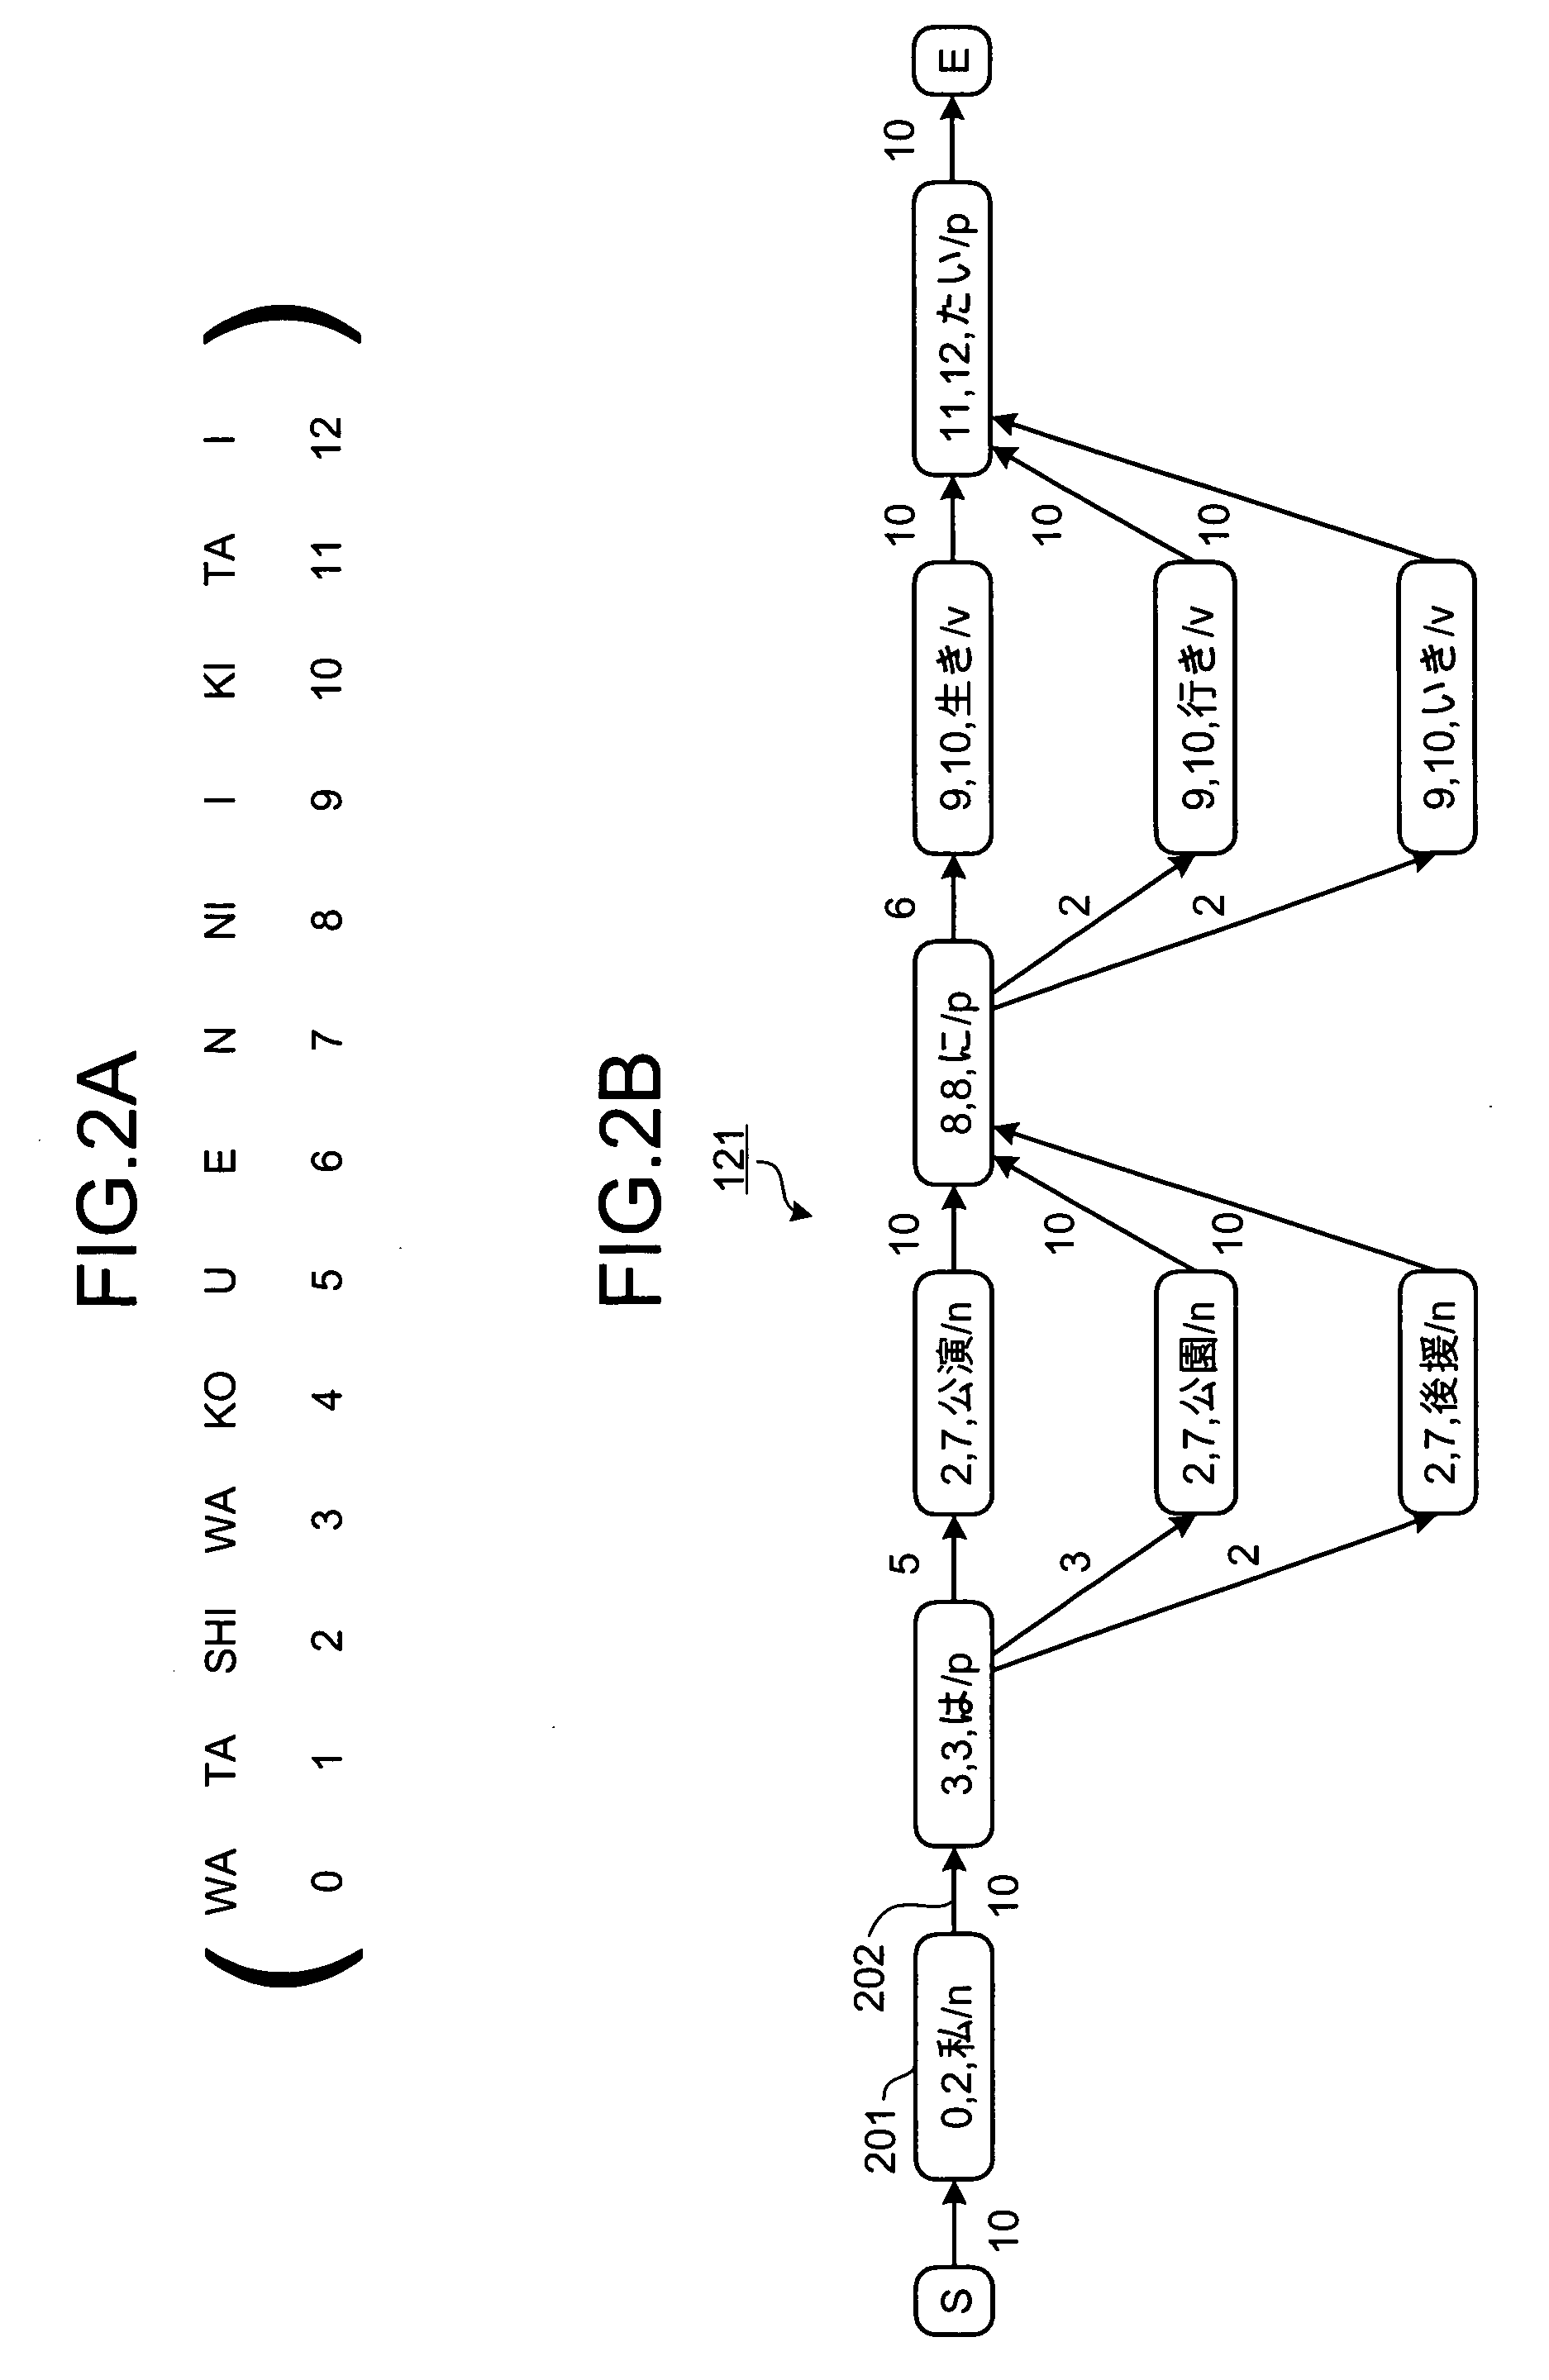 Apparatus, method, and computer program product for speech recognition allowing for recognition of character string in speech input